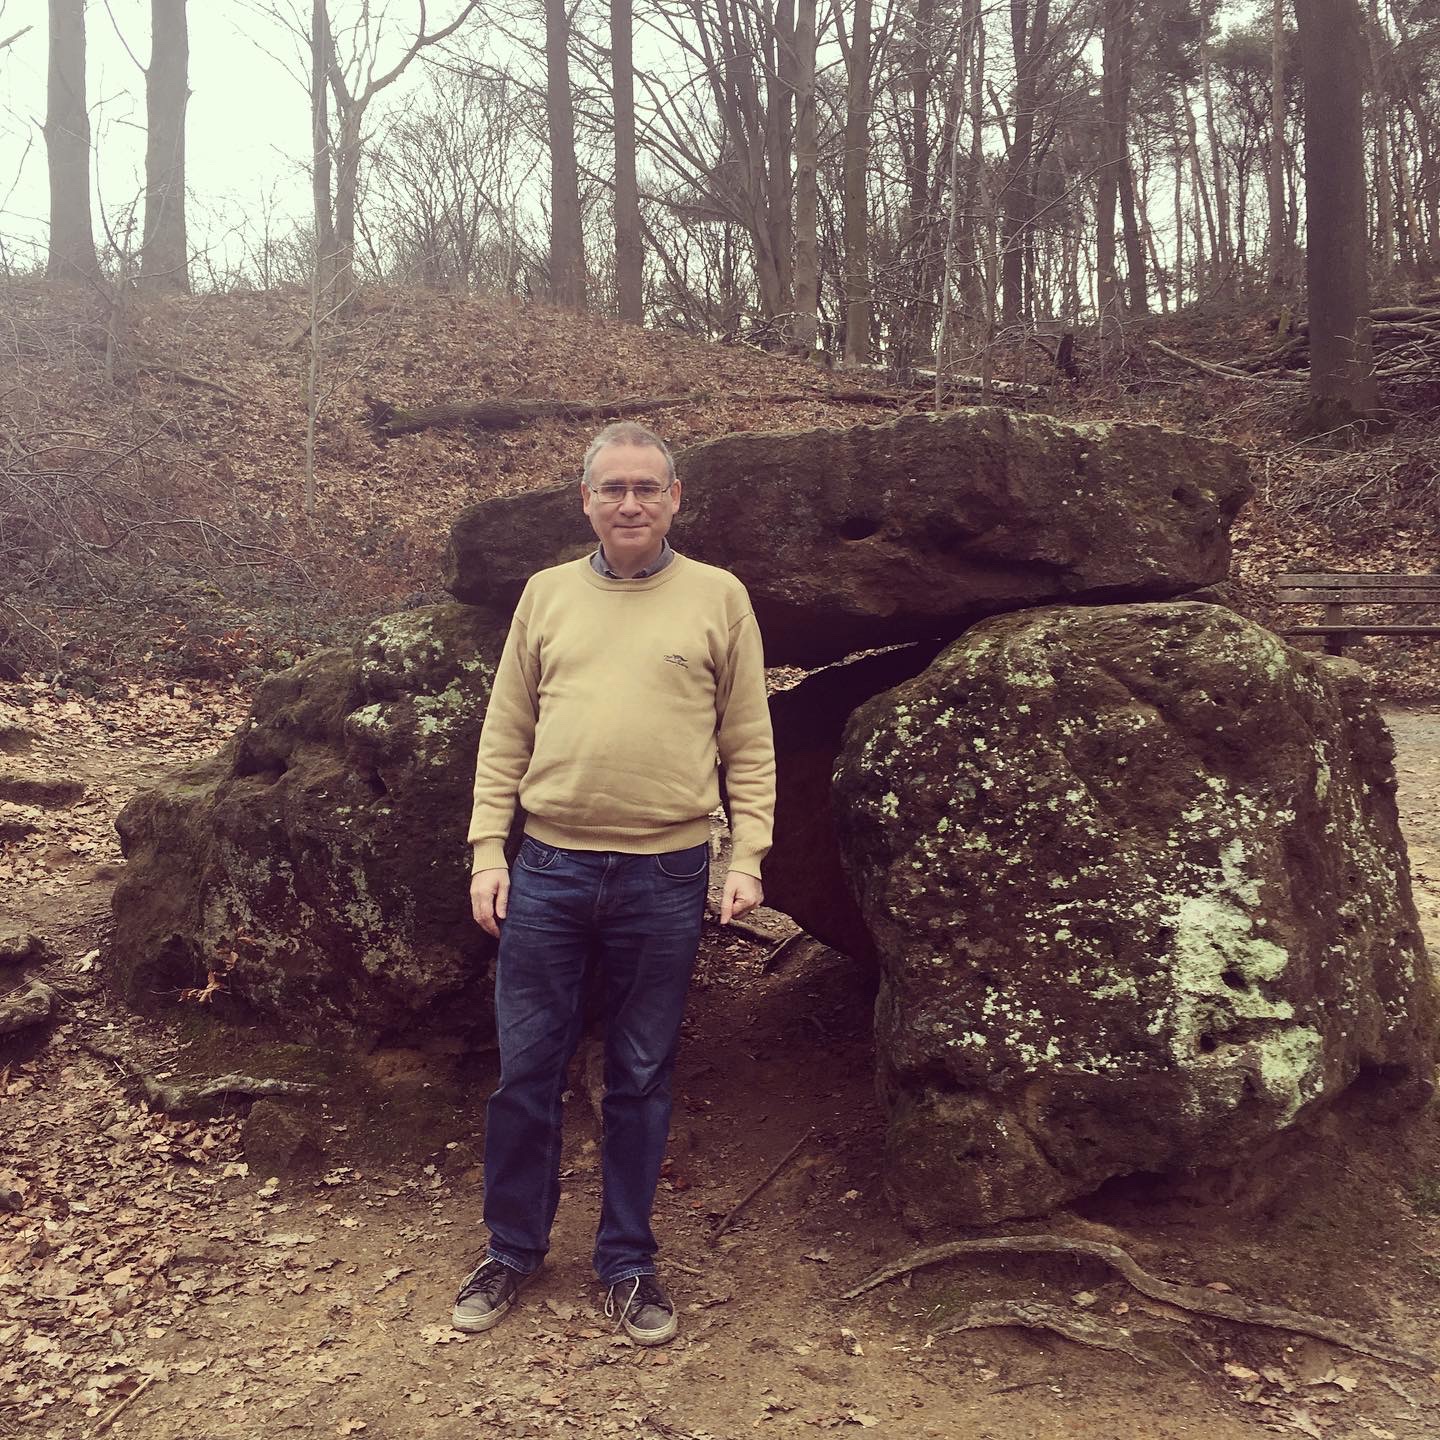 Nicholas Whyte standing in a woodland area. Immediately behind him are some large boulders, and further behind is a hillside with trees and fallen leaves.